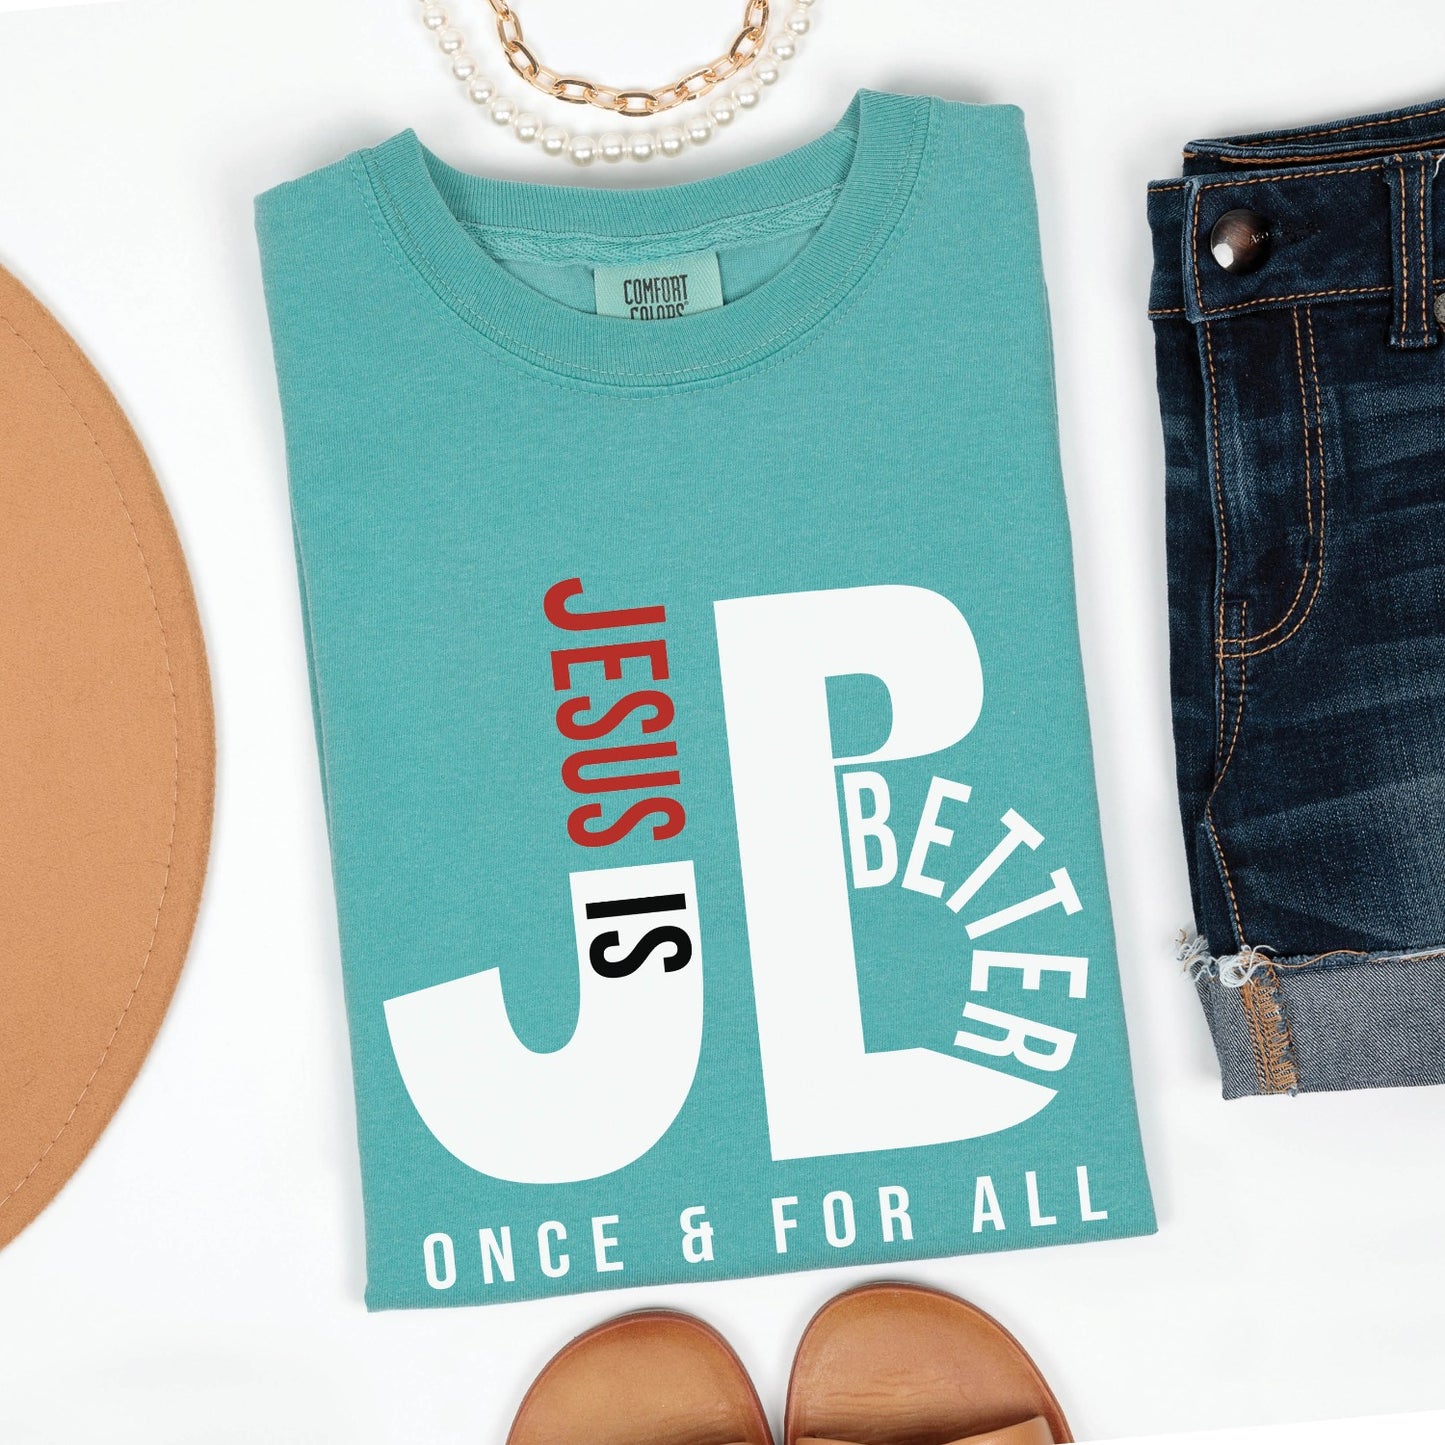 Folded Seafoam Bright Teal color JB typography Jesus is Better Once and For All Christian book of Hebrews Unisex Comfort Colors C1717 t-shirt, created for faith-based women and men